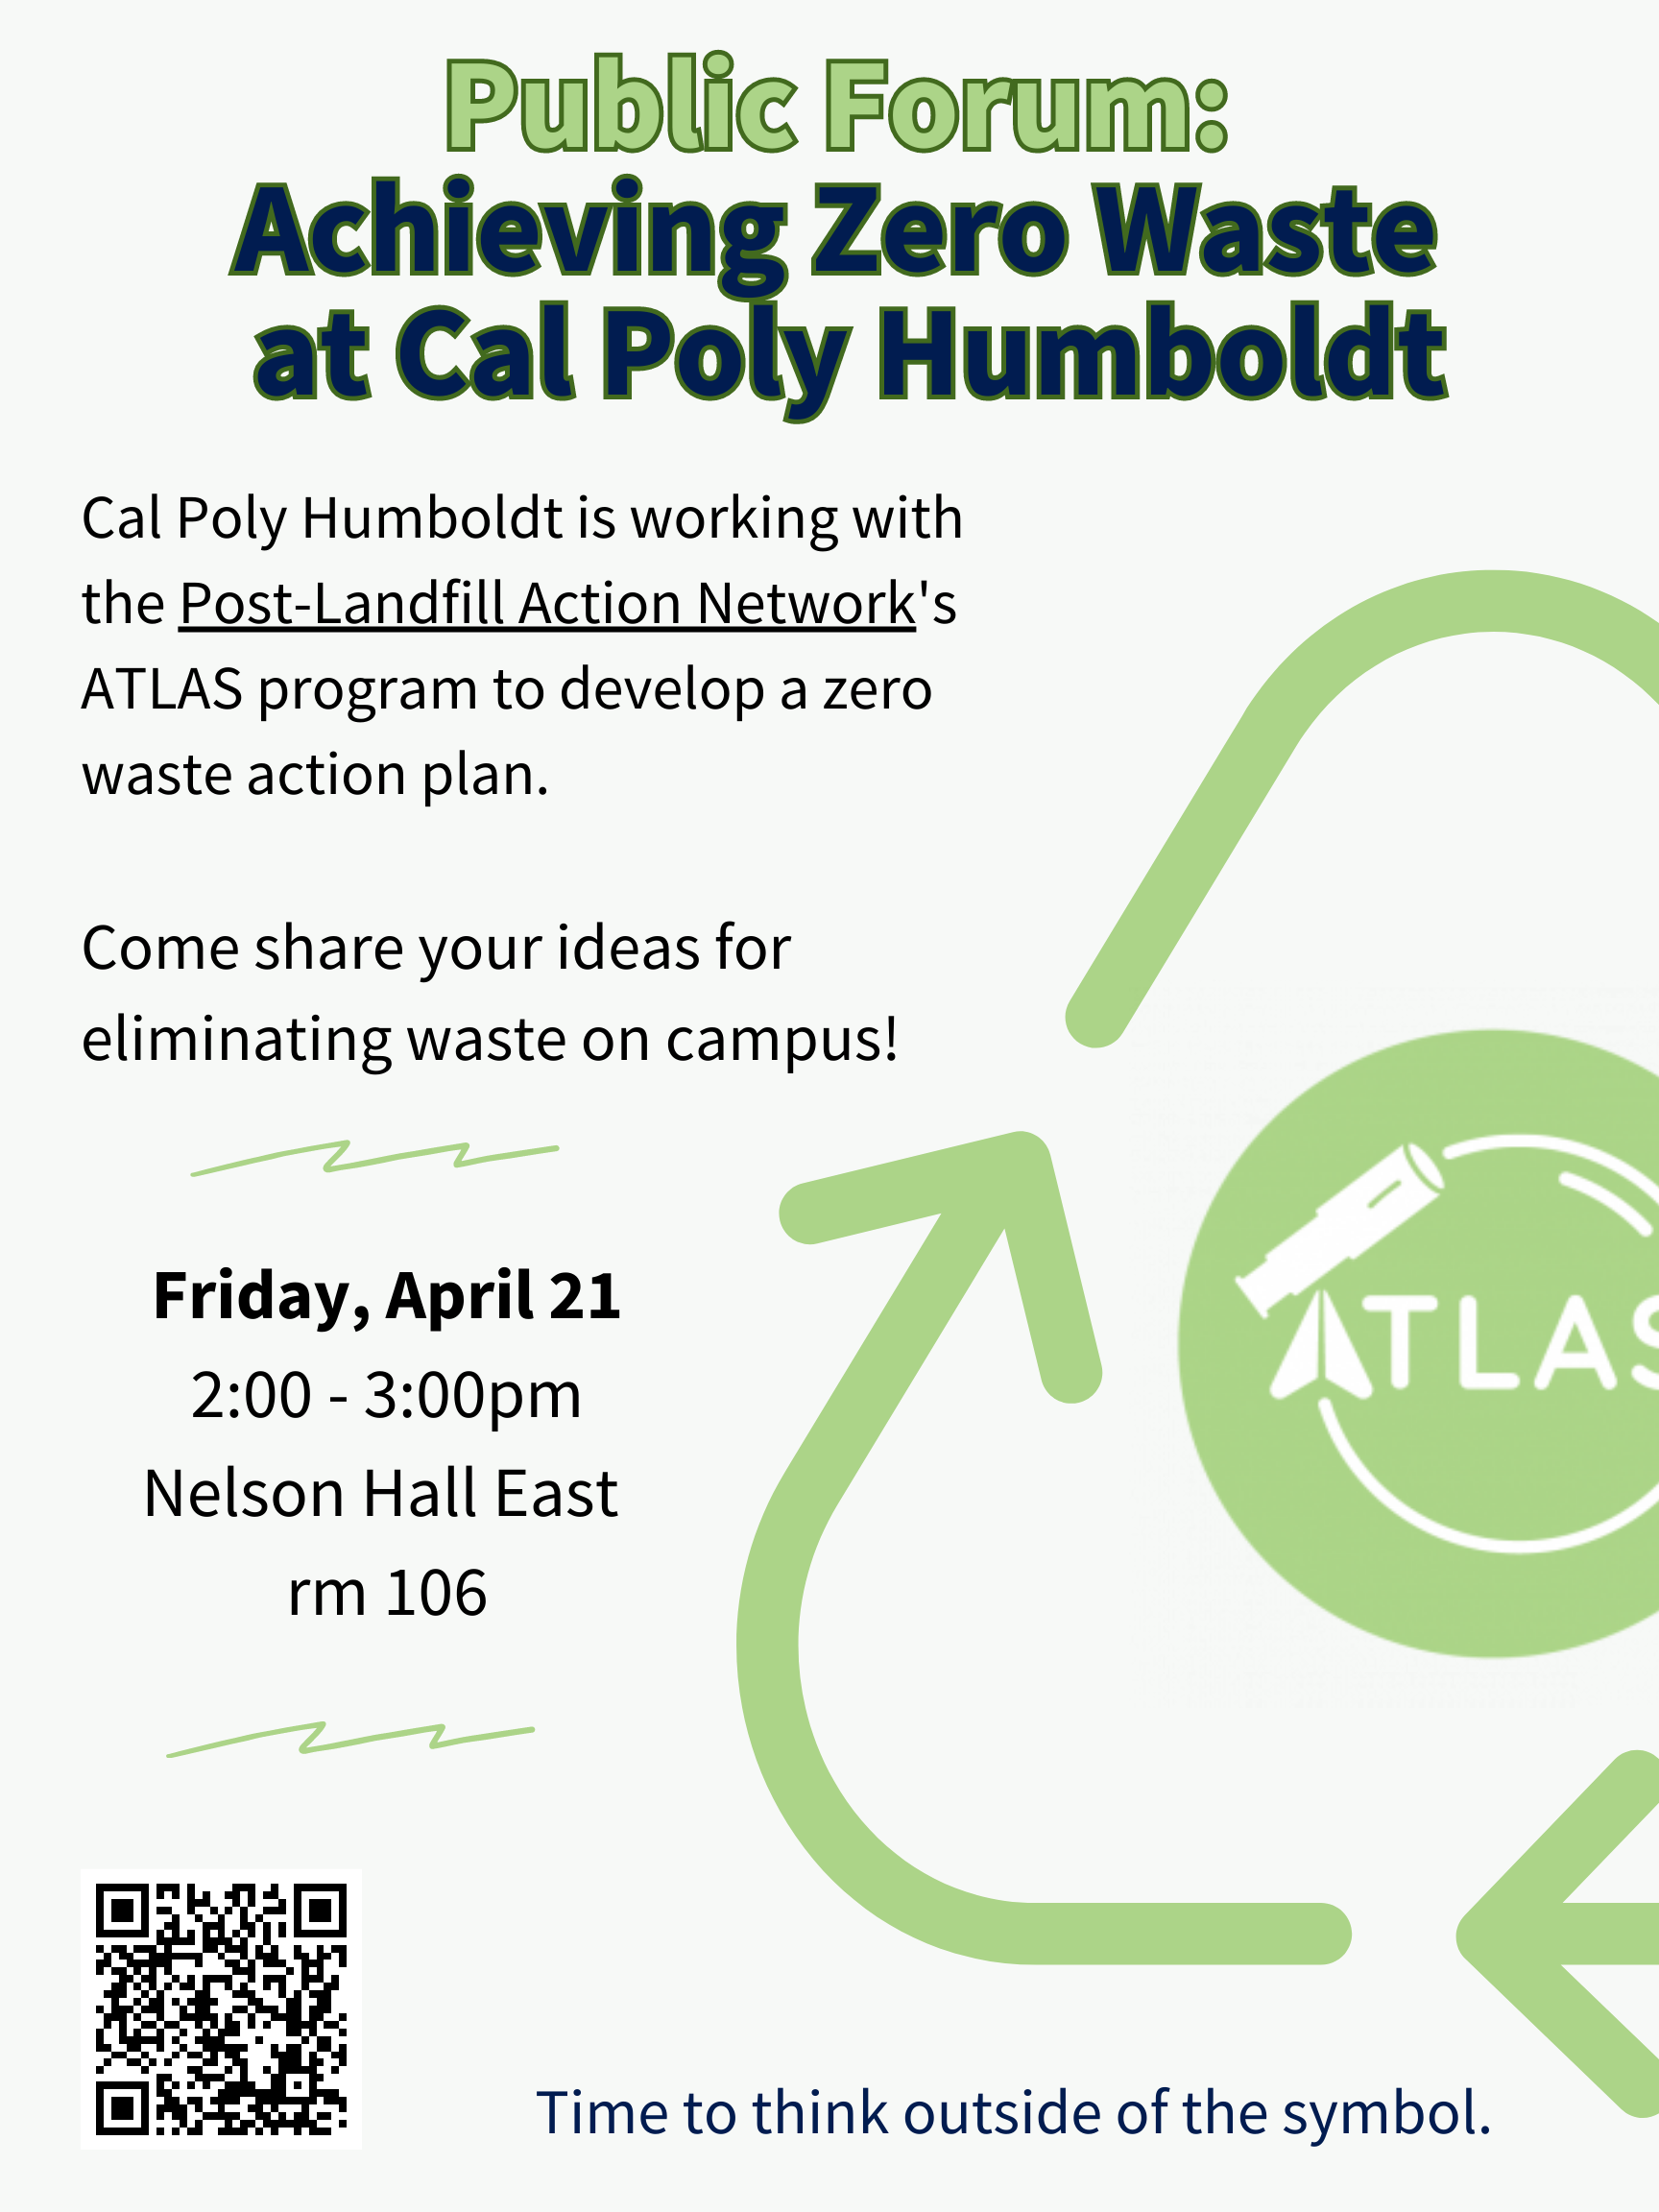 Flyer shows Public Forum: Zero Waste at Cal Poly Humboldt, Fri April 21 2-3pm Nelson Hall East 106